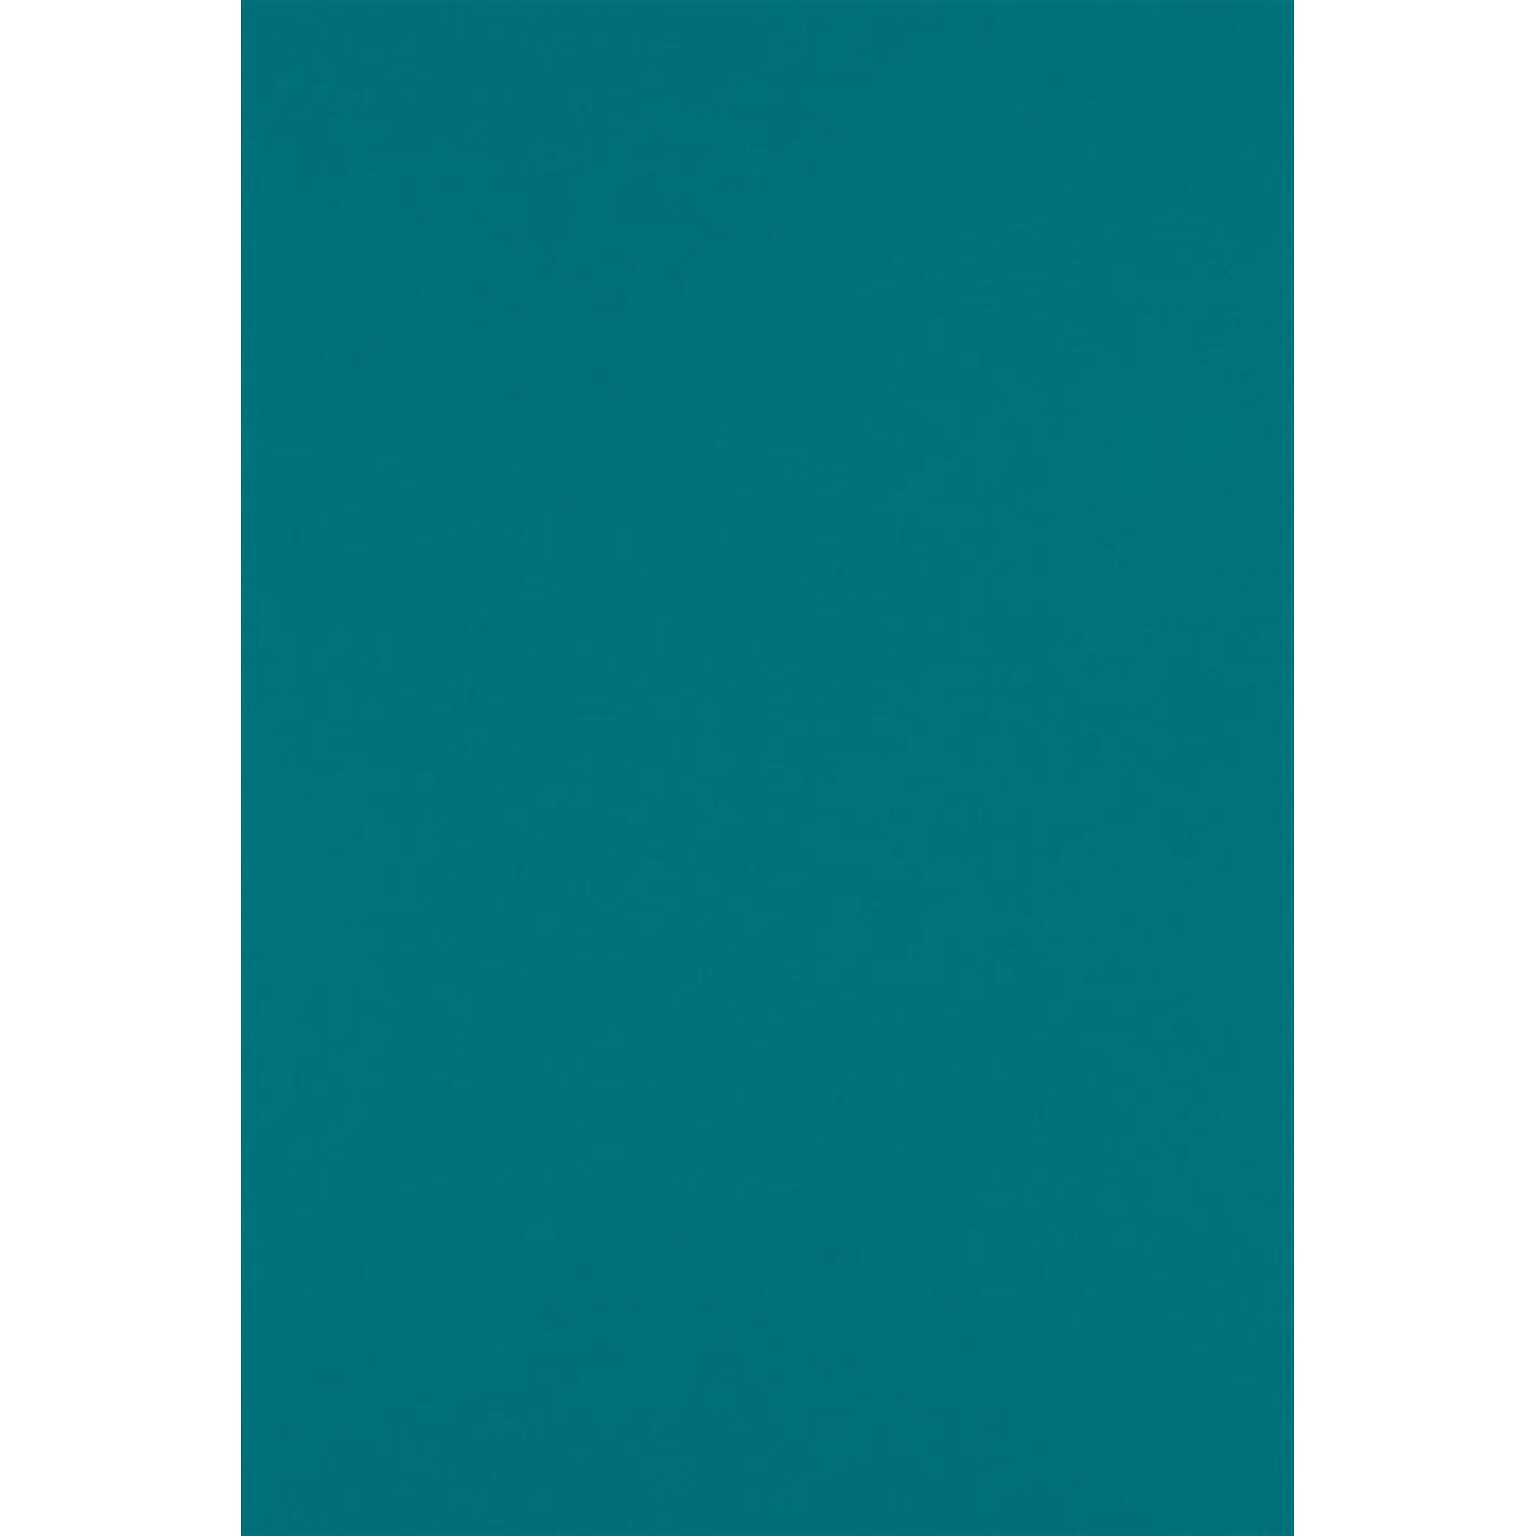 LUX 100 lb. Cardstock Paper, 13 x 19, Teal, 250 Sheets/Pack (1319-C-25-250)